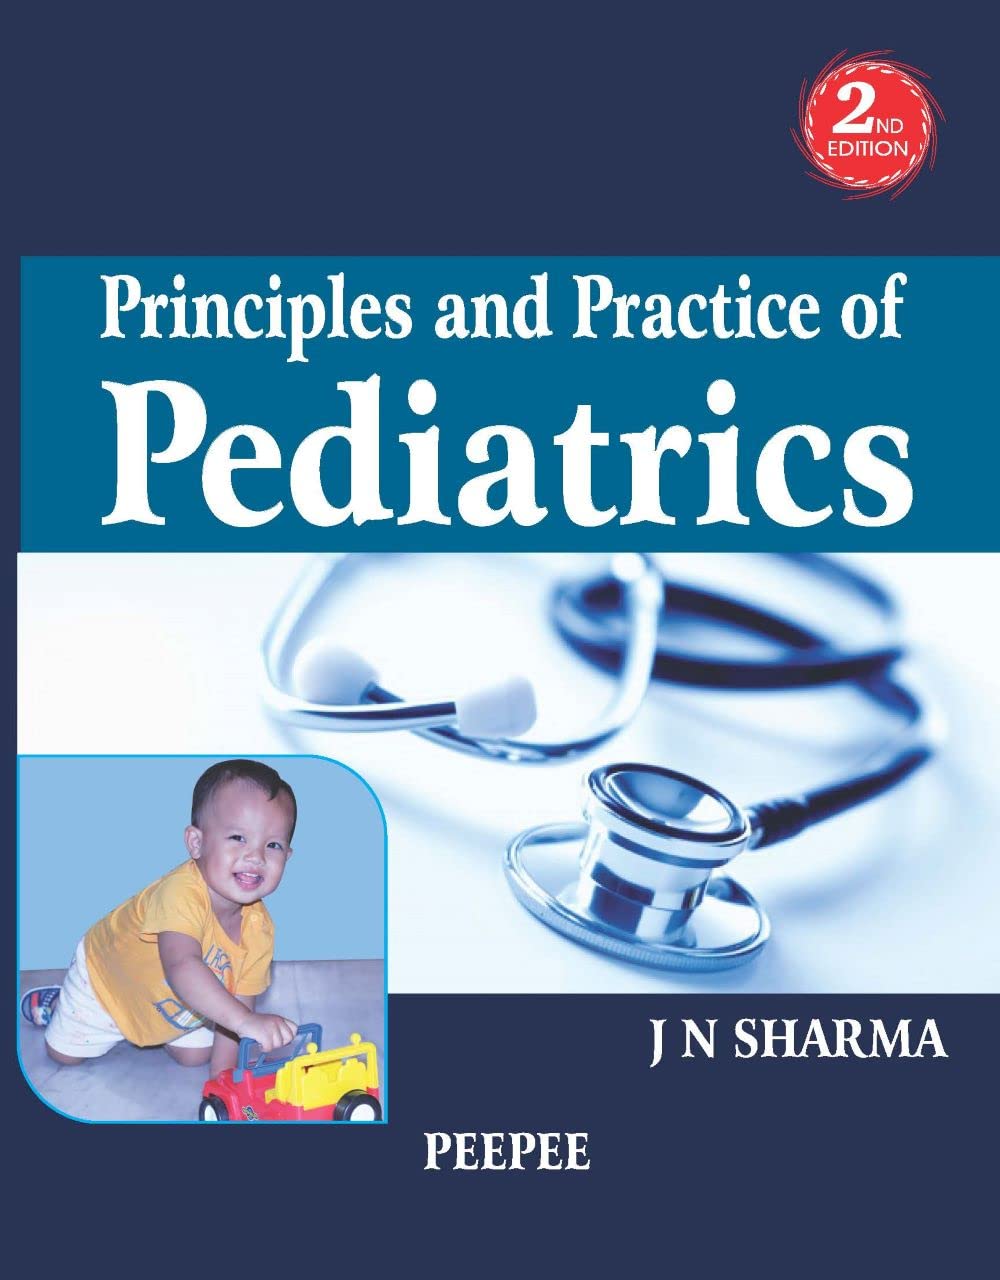 Principles and Practice of Pediatrics 2nd edition 2018